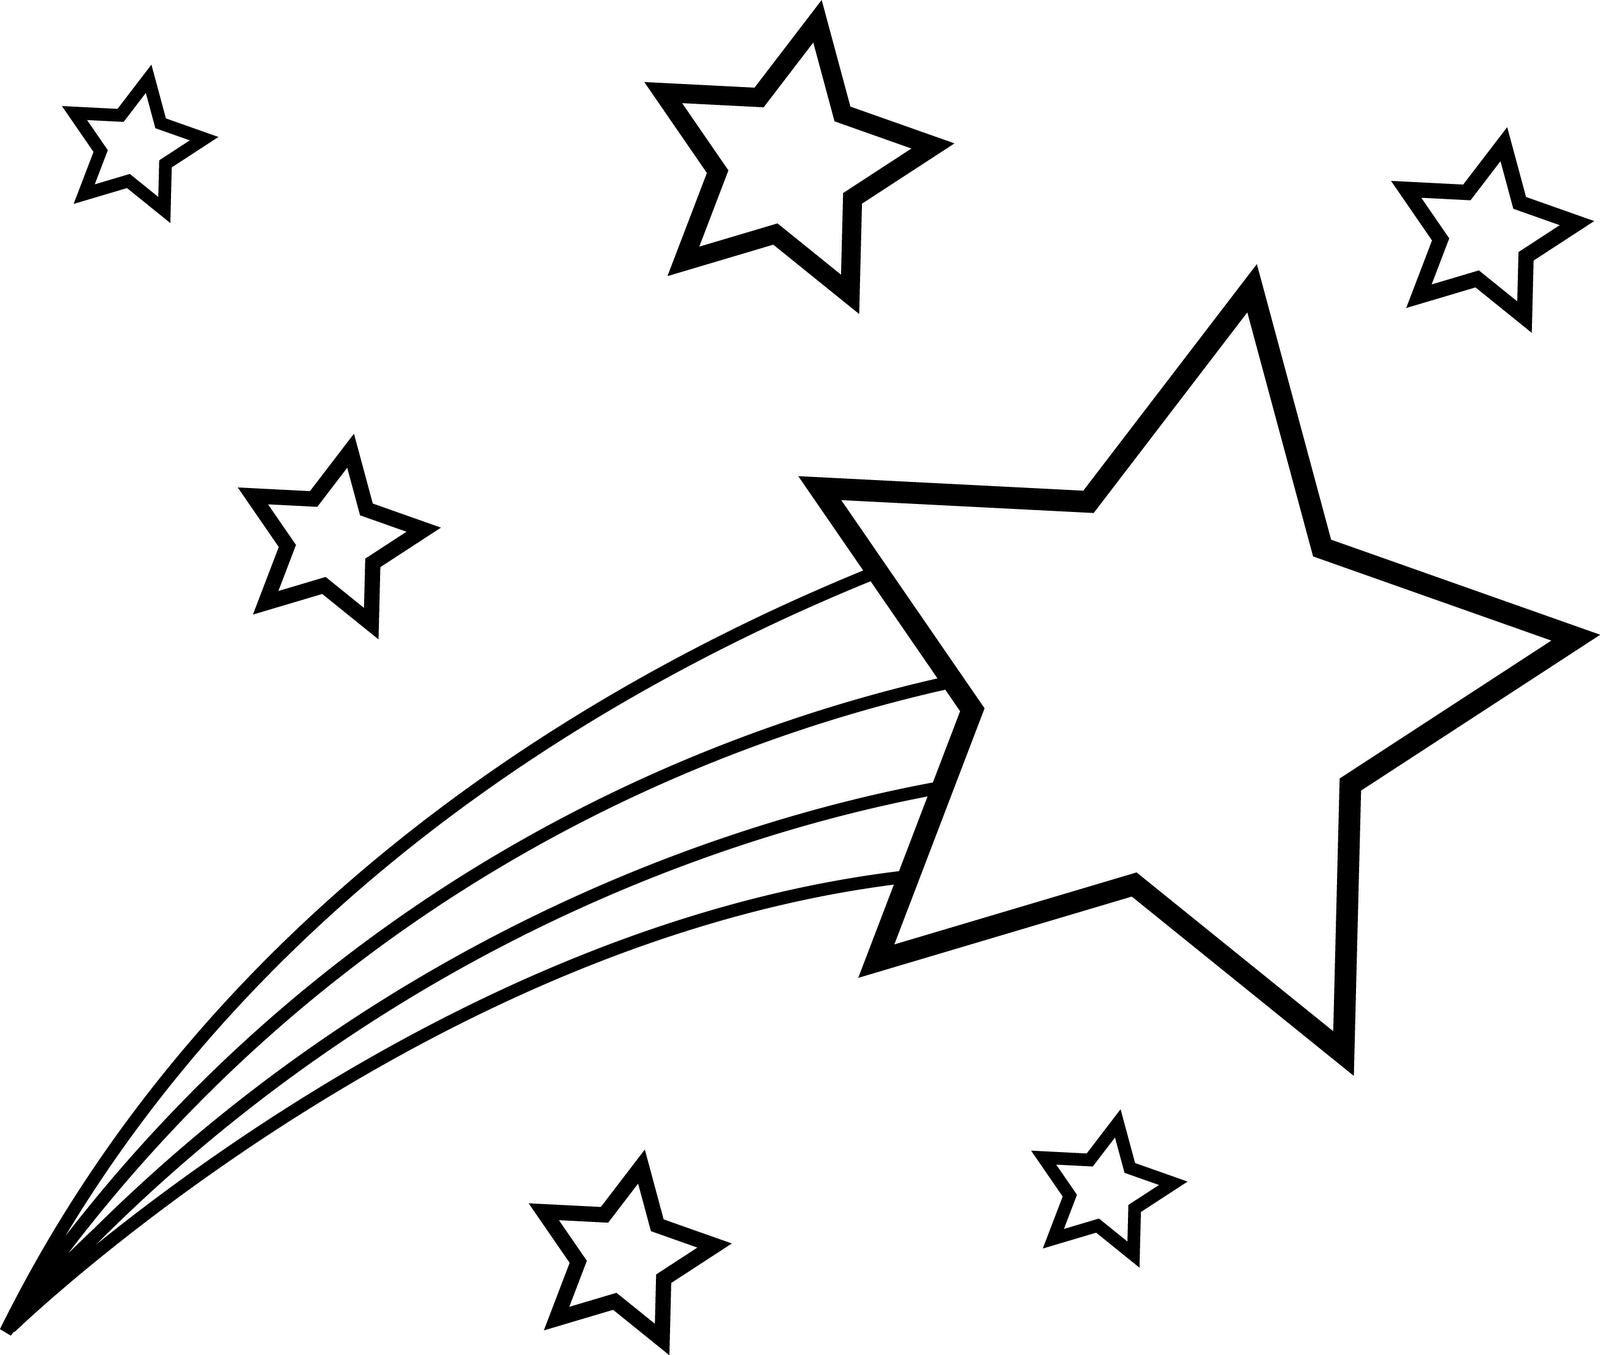 Shooting Star clipart #9, Download drawings